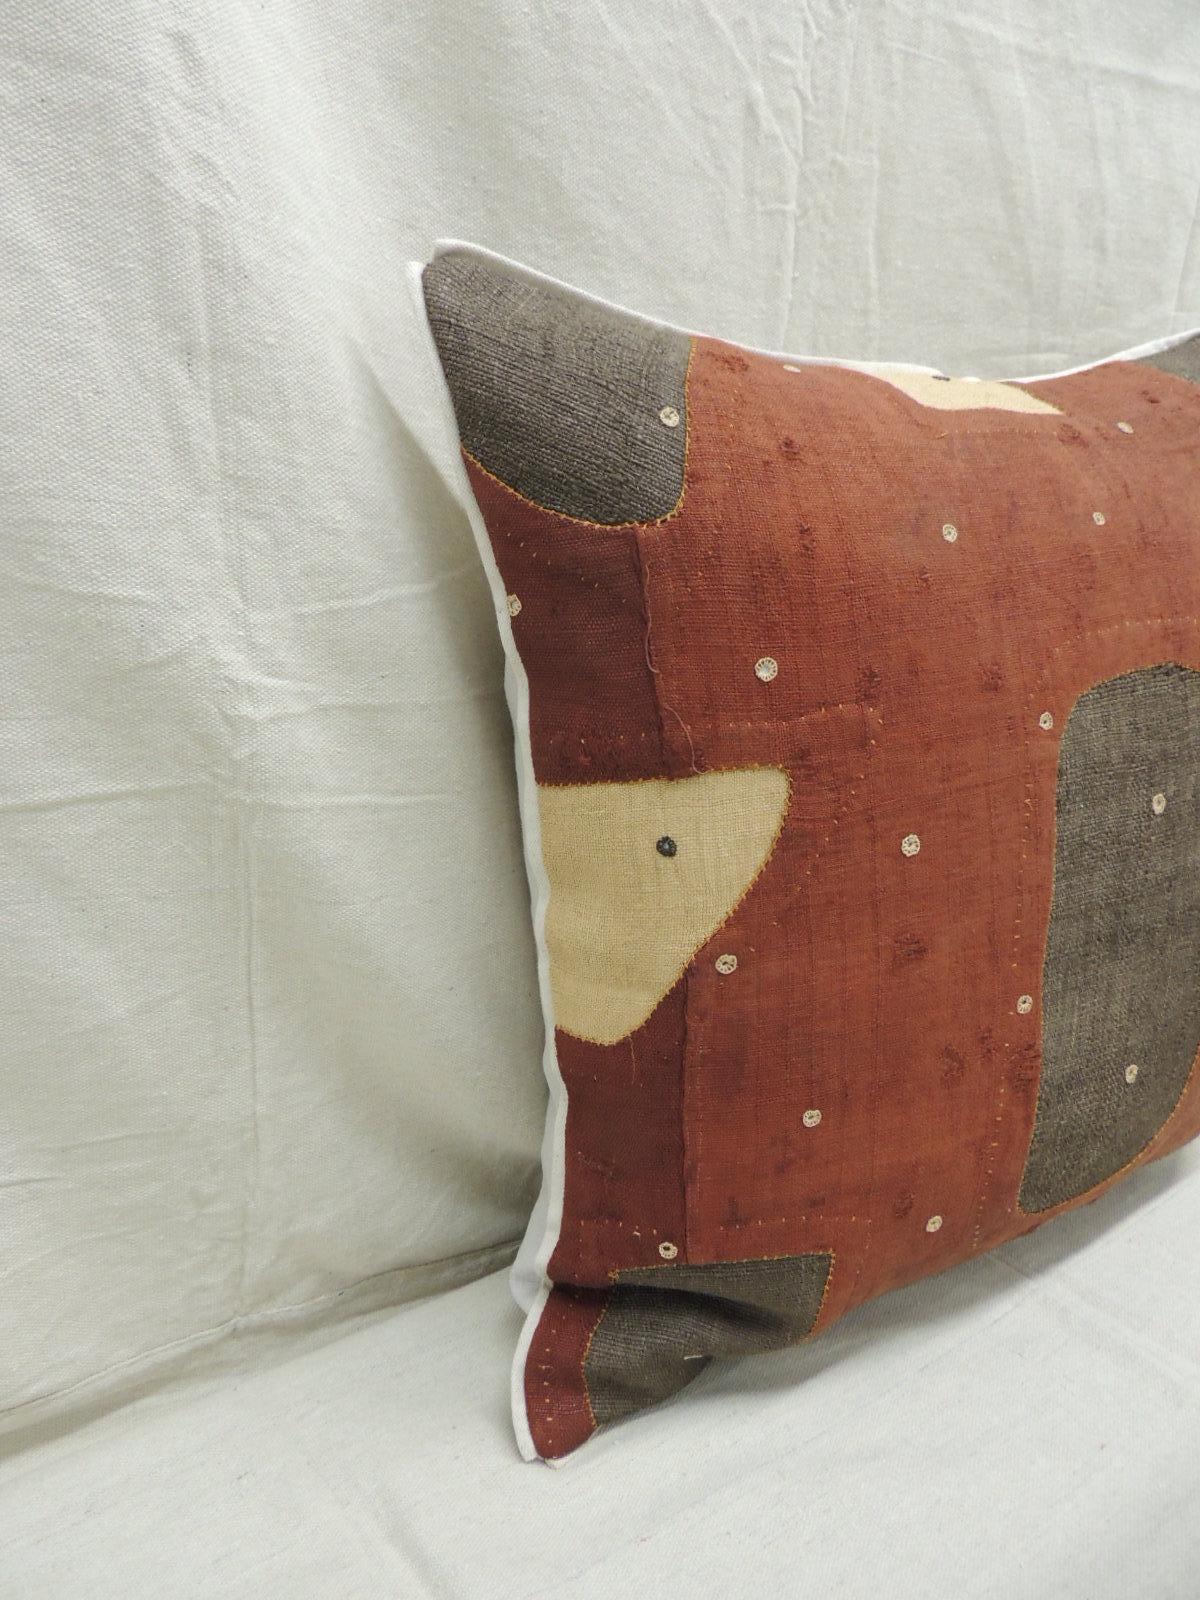 Applique raffia, patchwork and applique brown, rust and natural decorative pillow with,
Custom flat cotton trim in earth-tone khaki color all around. 
Grey cotton and linen backing. 
Pillow handcrafted and designed in the USA with custom made